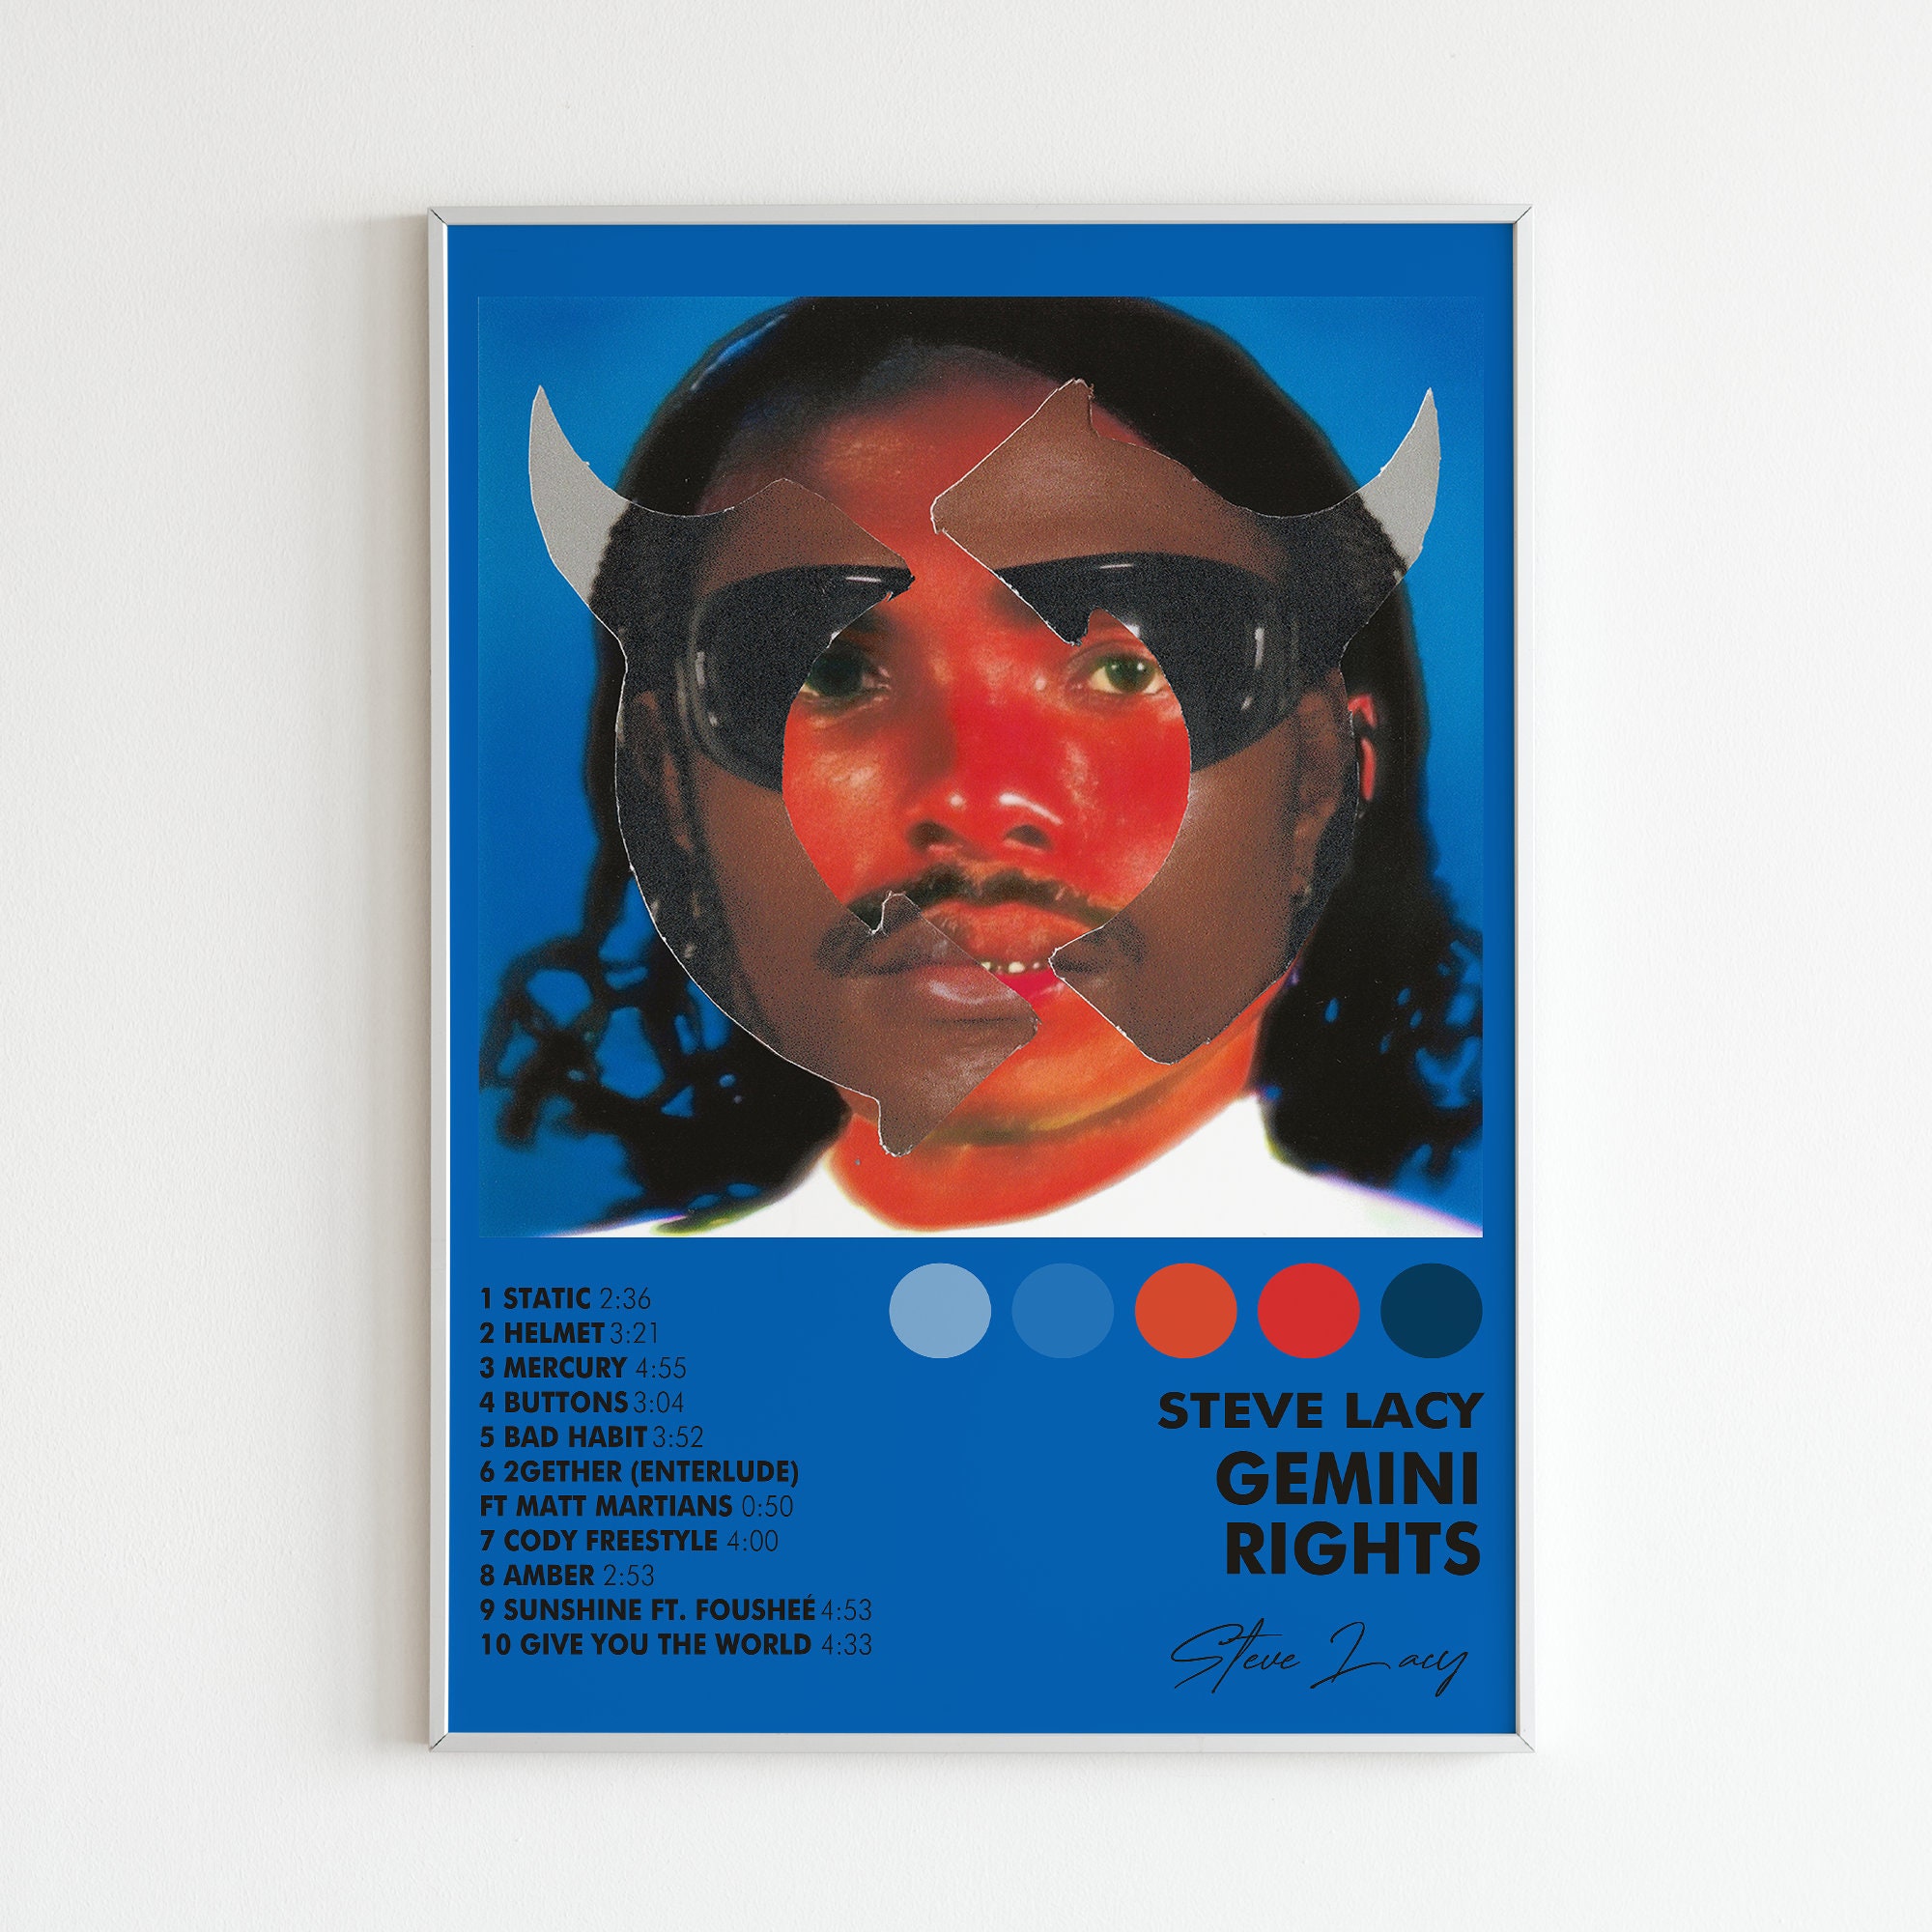 Steve Lacy Gemini Rights Album Poster sold by BoKelly, SKU 25039854